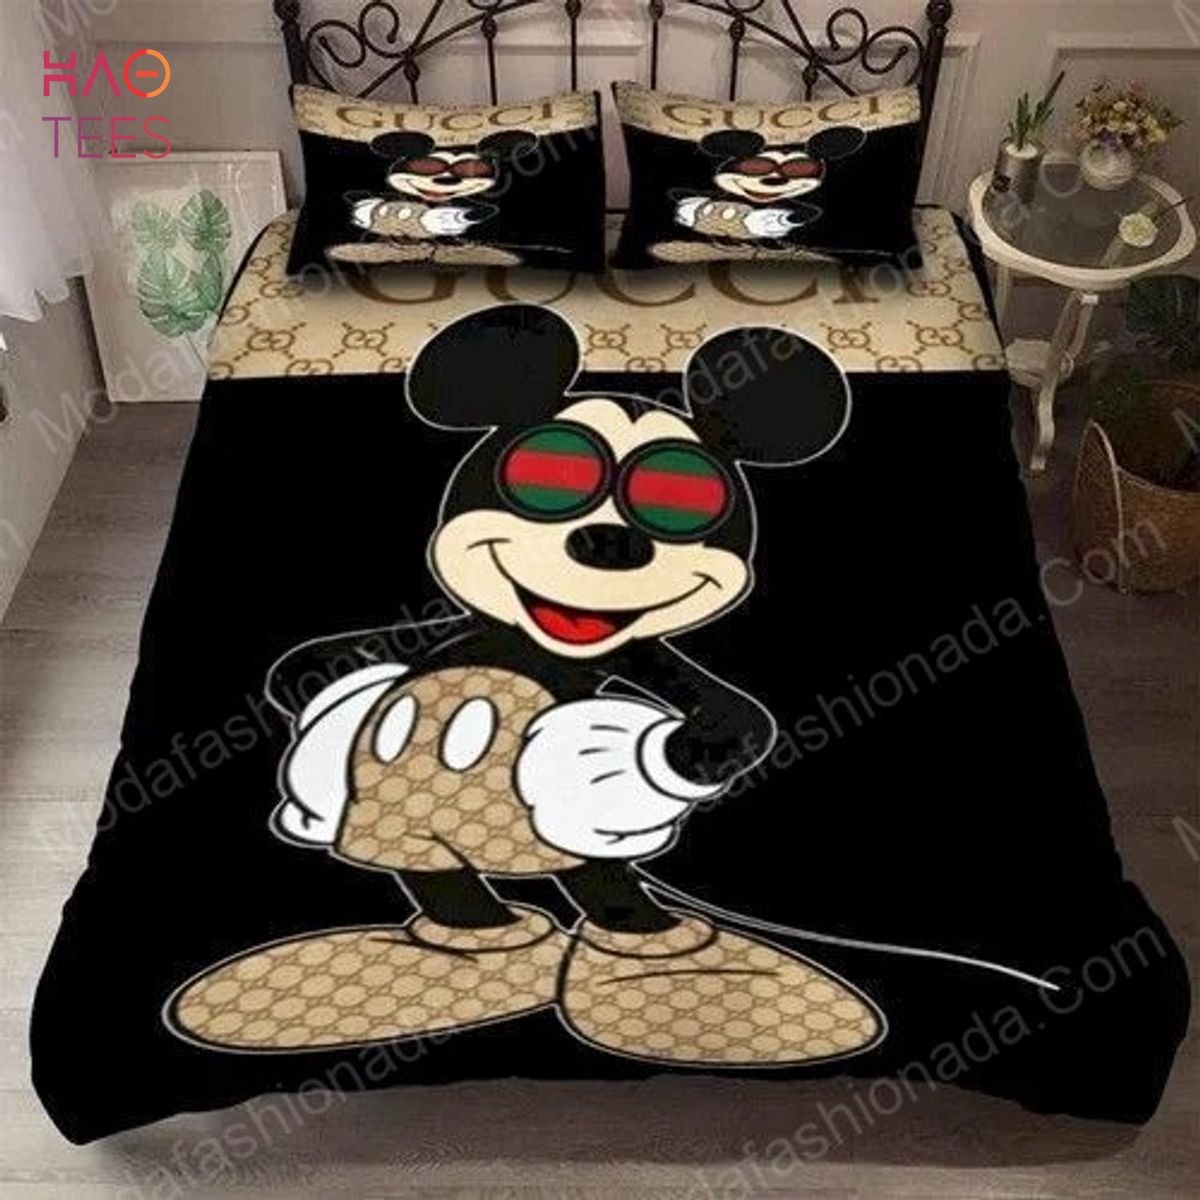 Mickey Minnie Mouse Gucci Fashion Logo Luxury Brand Bedding Sets, Bedroom  Decor , Decorations For Home Bedding Sets